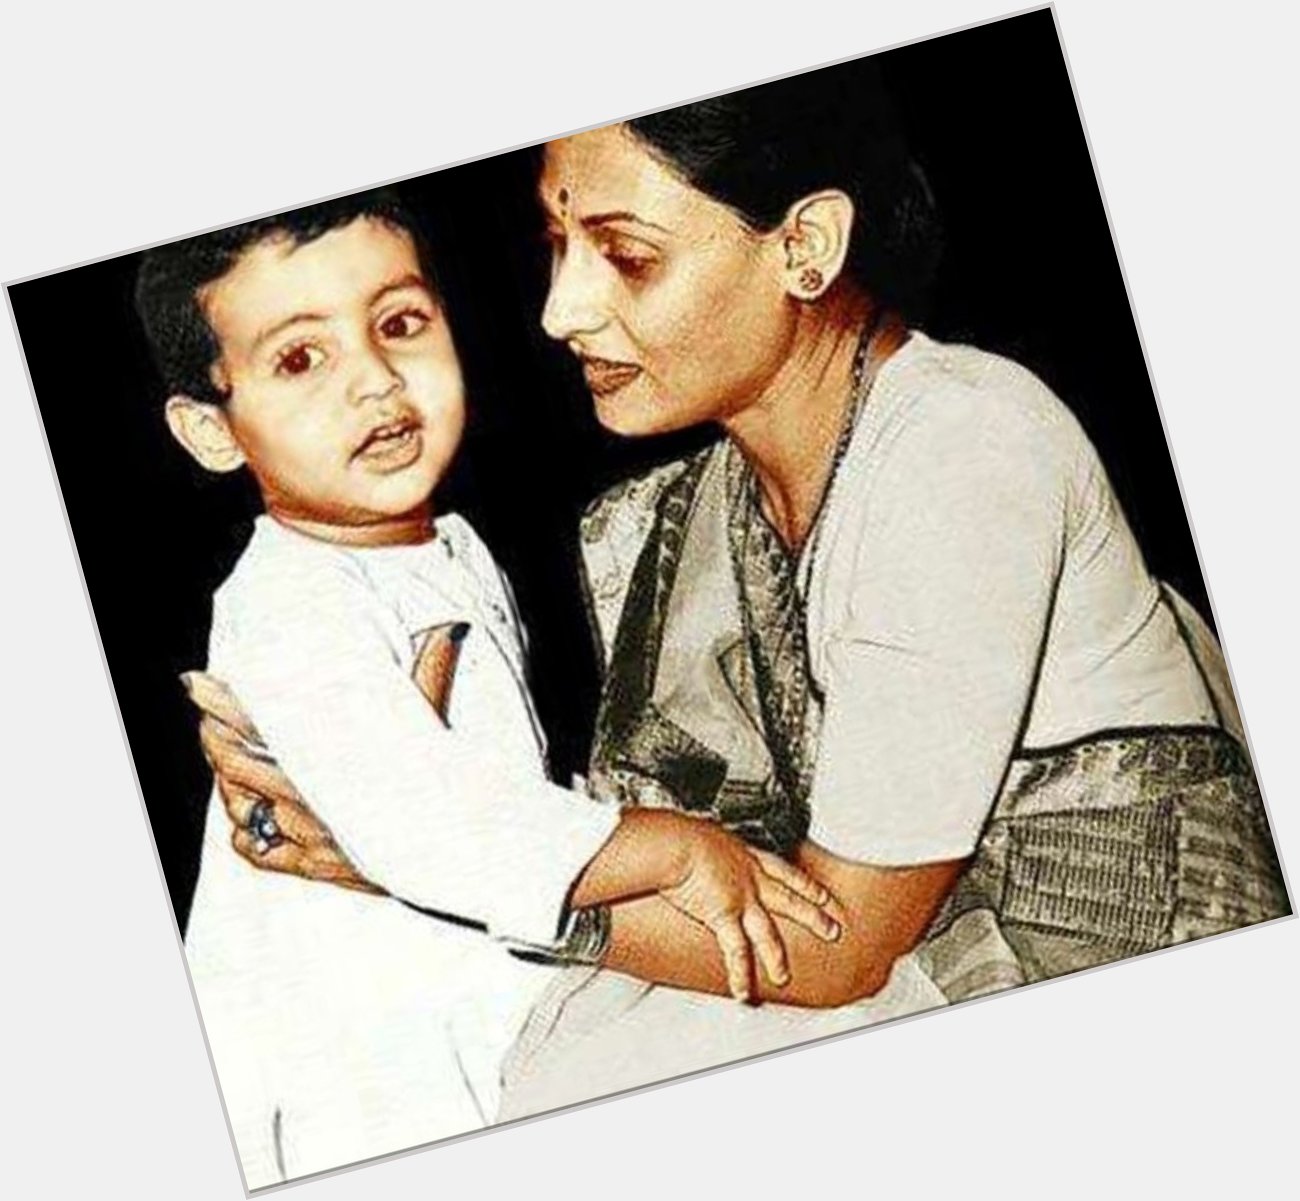  wish you very happy birthday Abhishek Bachchan. God bless you with lots and lots of happiness 